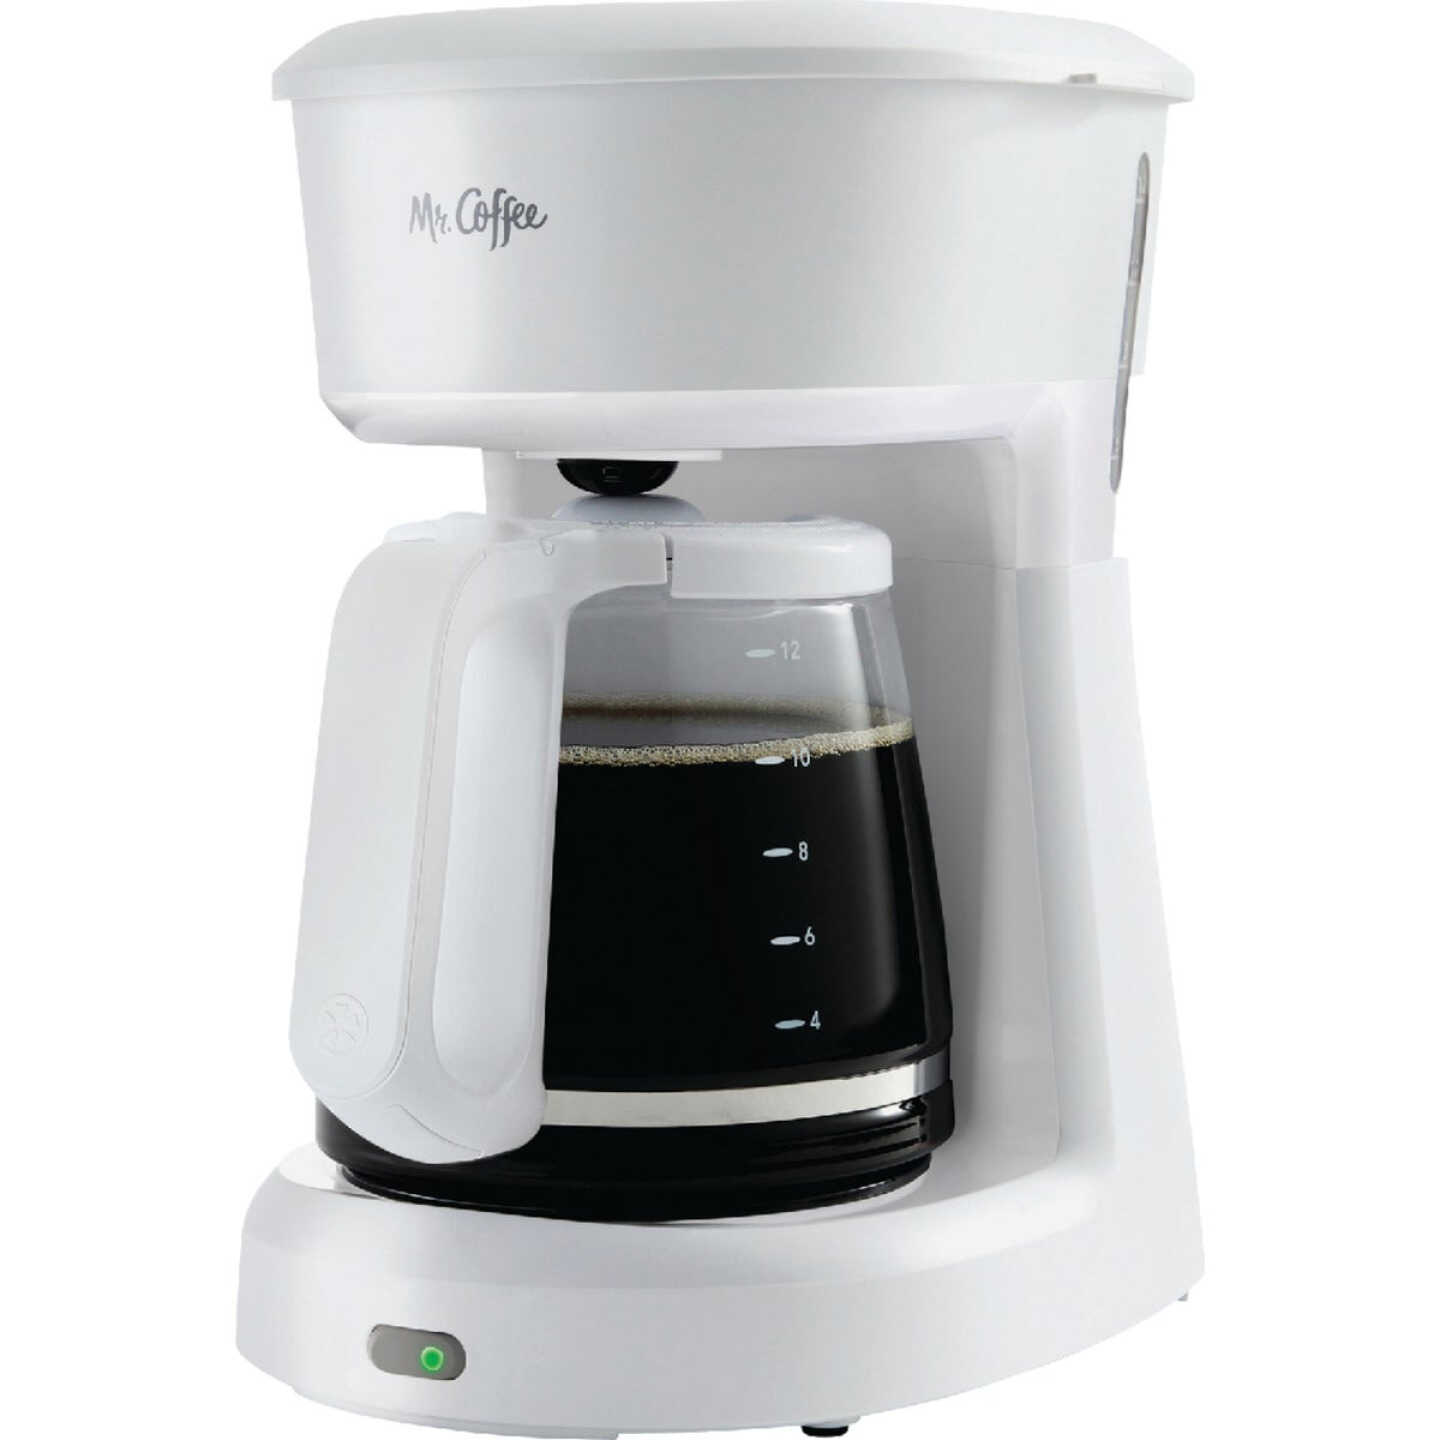 Mr. Coffee 14 Cup Simple Grind Coffee Grinder - Power Townsend Company